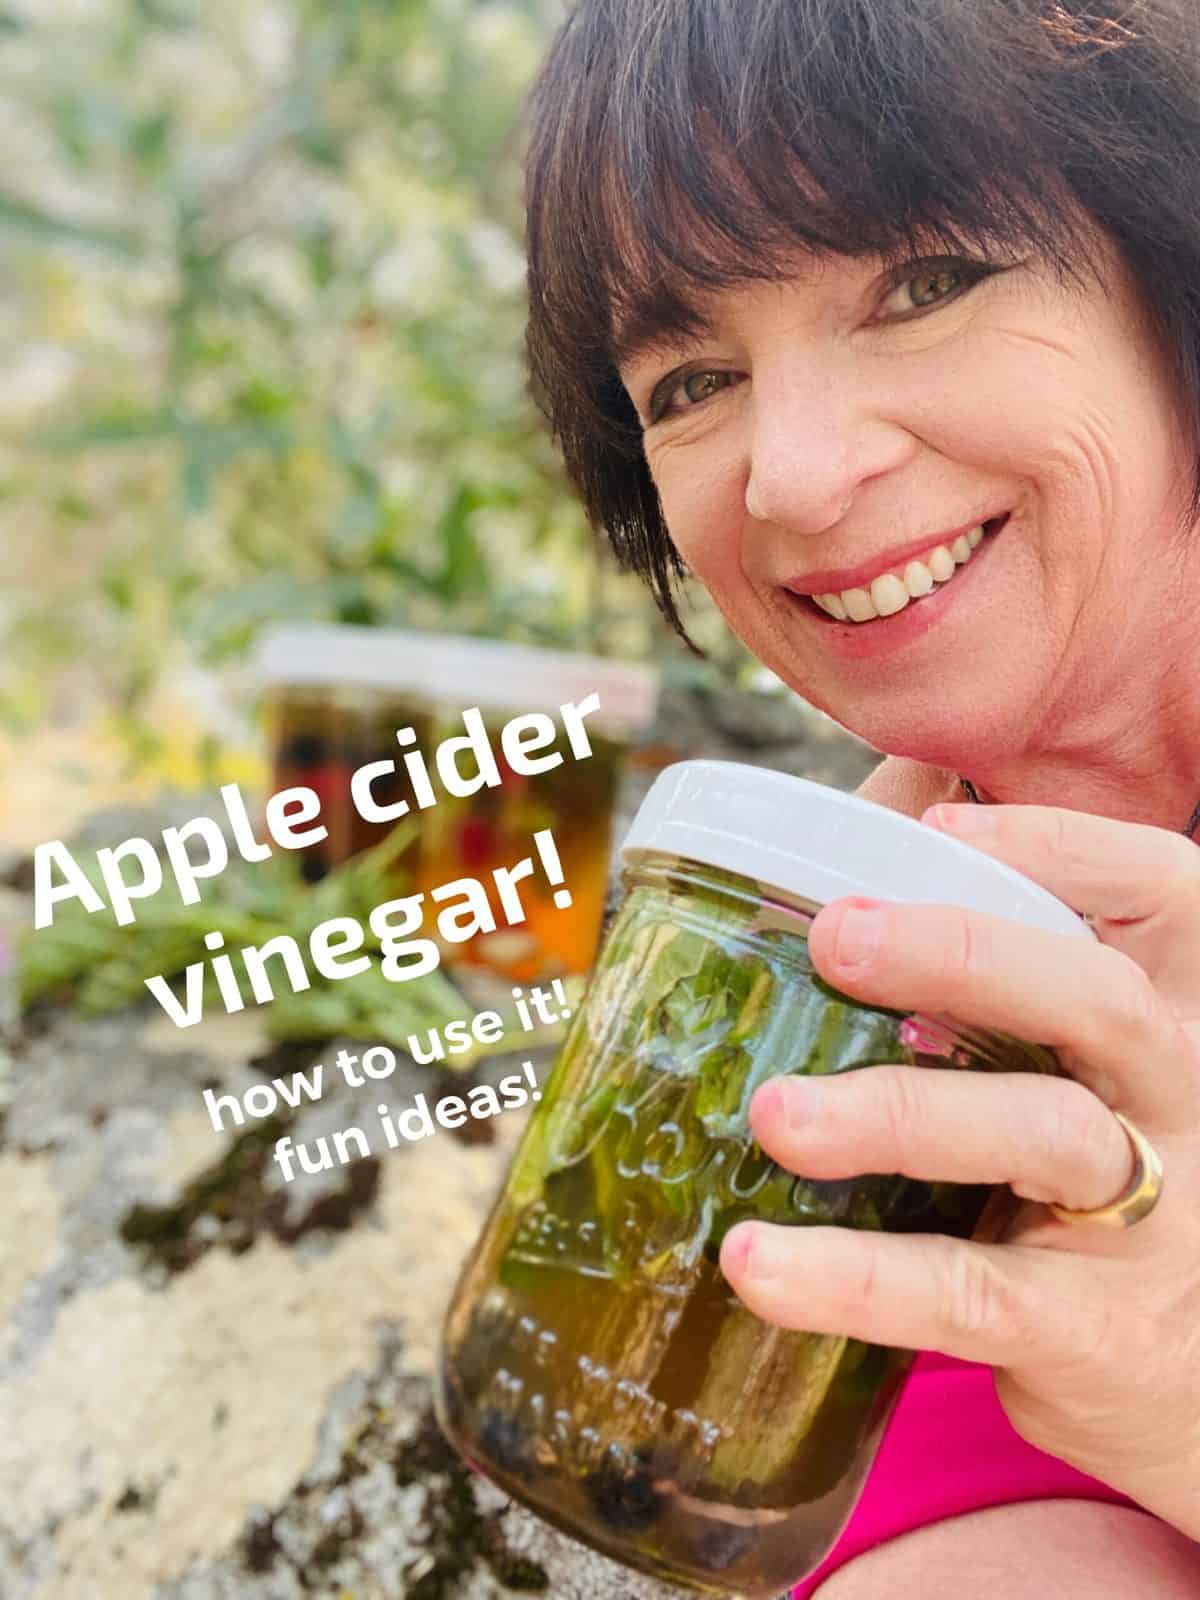 A photo of Amanda Rose holding a jar of infused apple cider vinegar with the title "Apple cider vinegar: How to Use it! Fun ideas!"